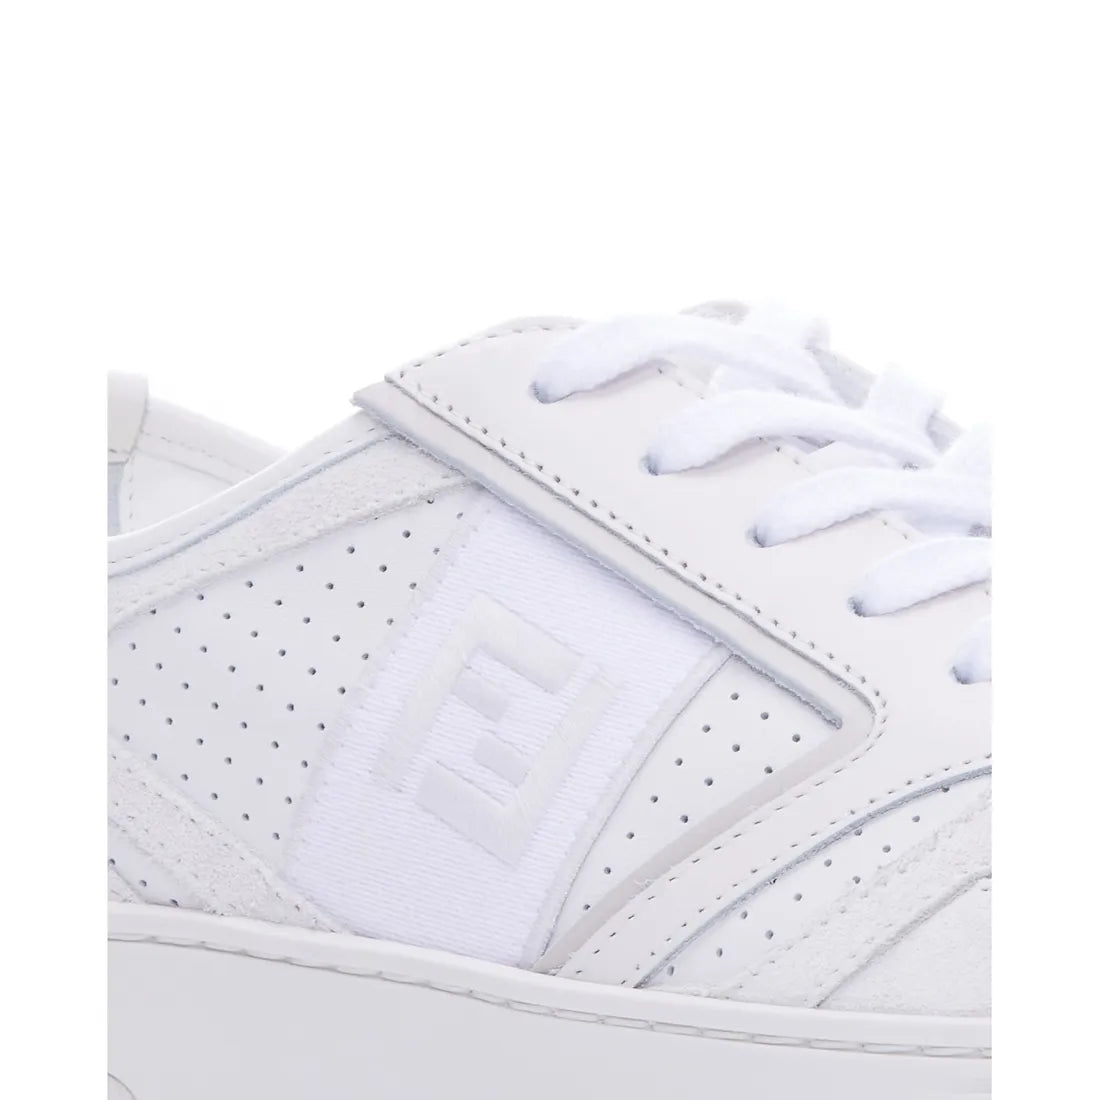 Fendi White Calf Leather Low Top Sneakers